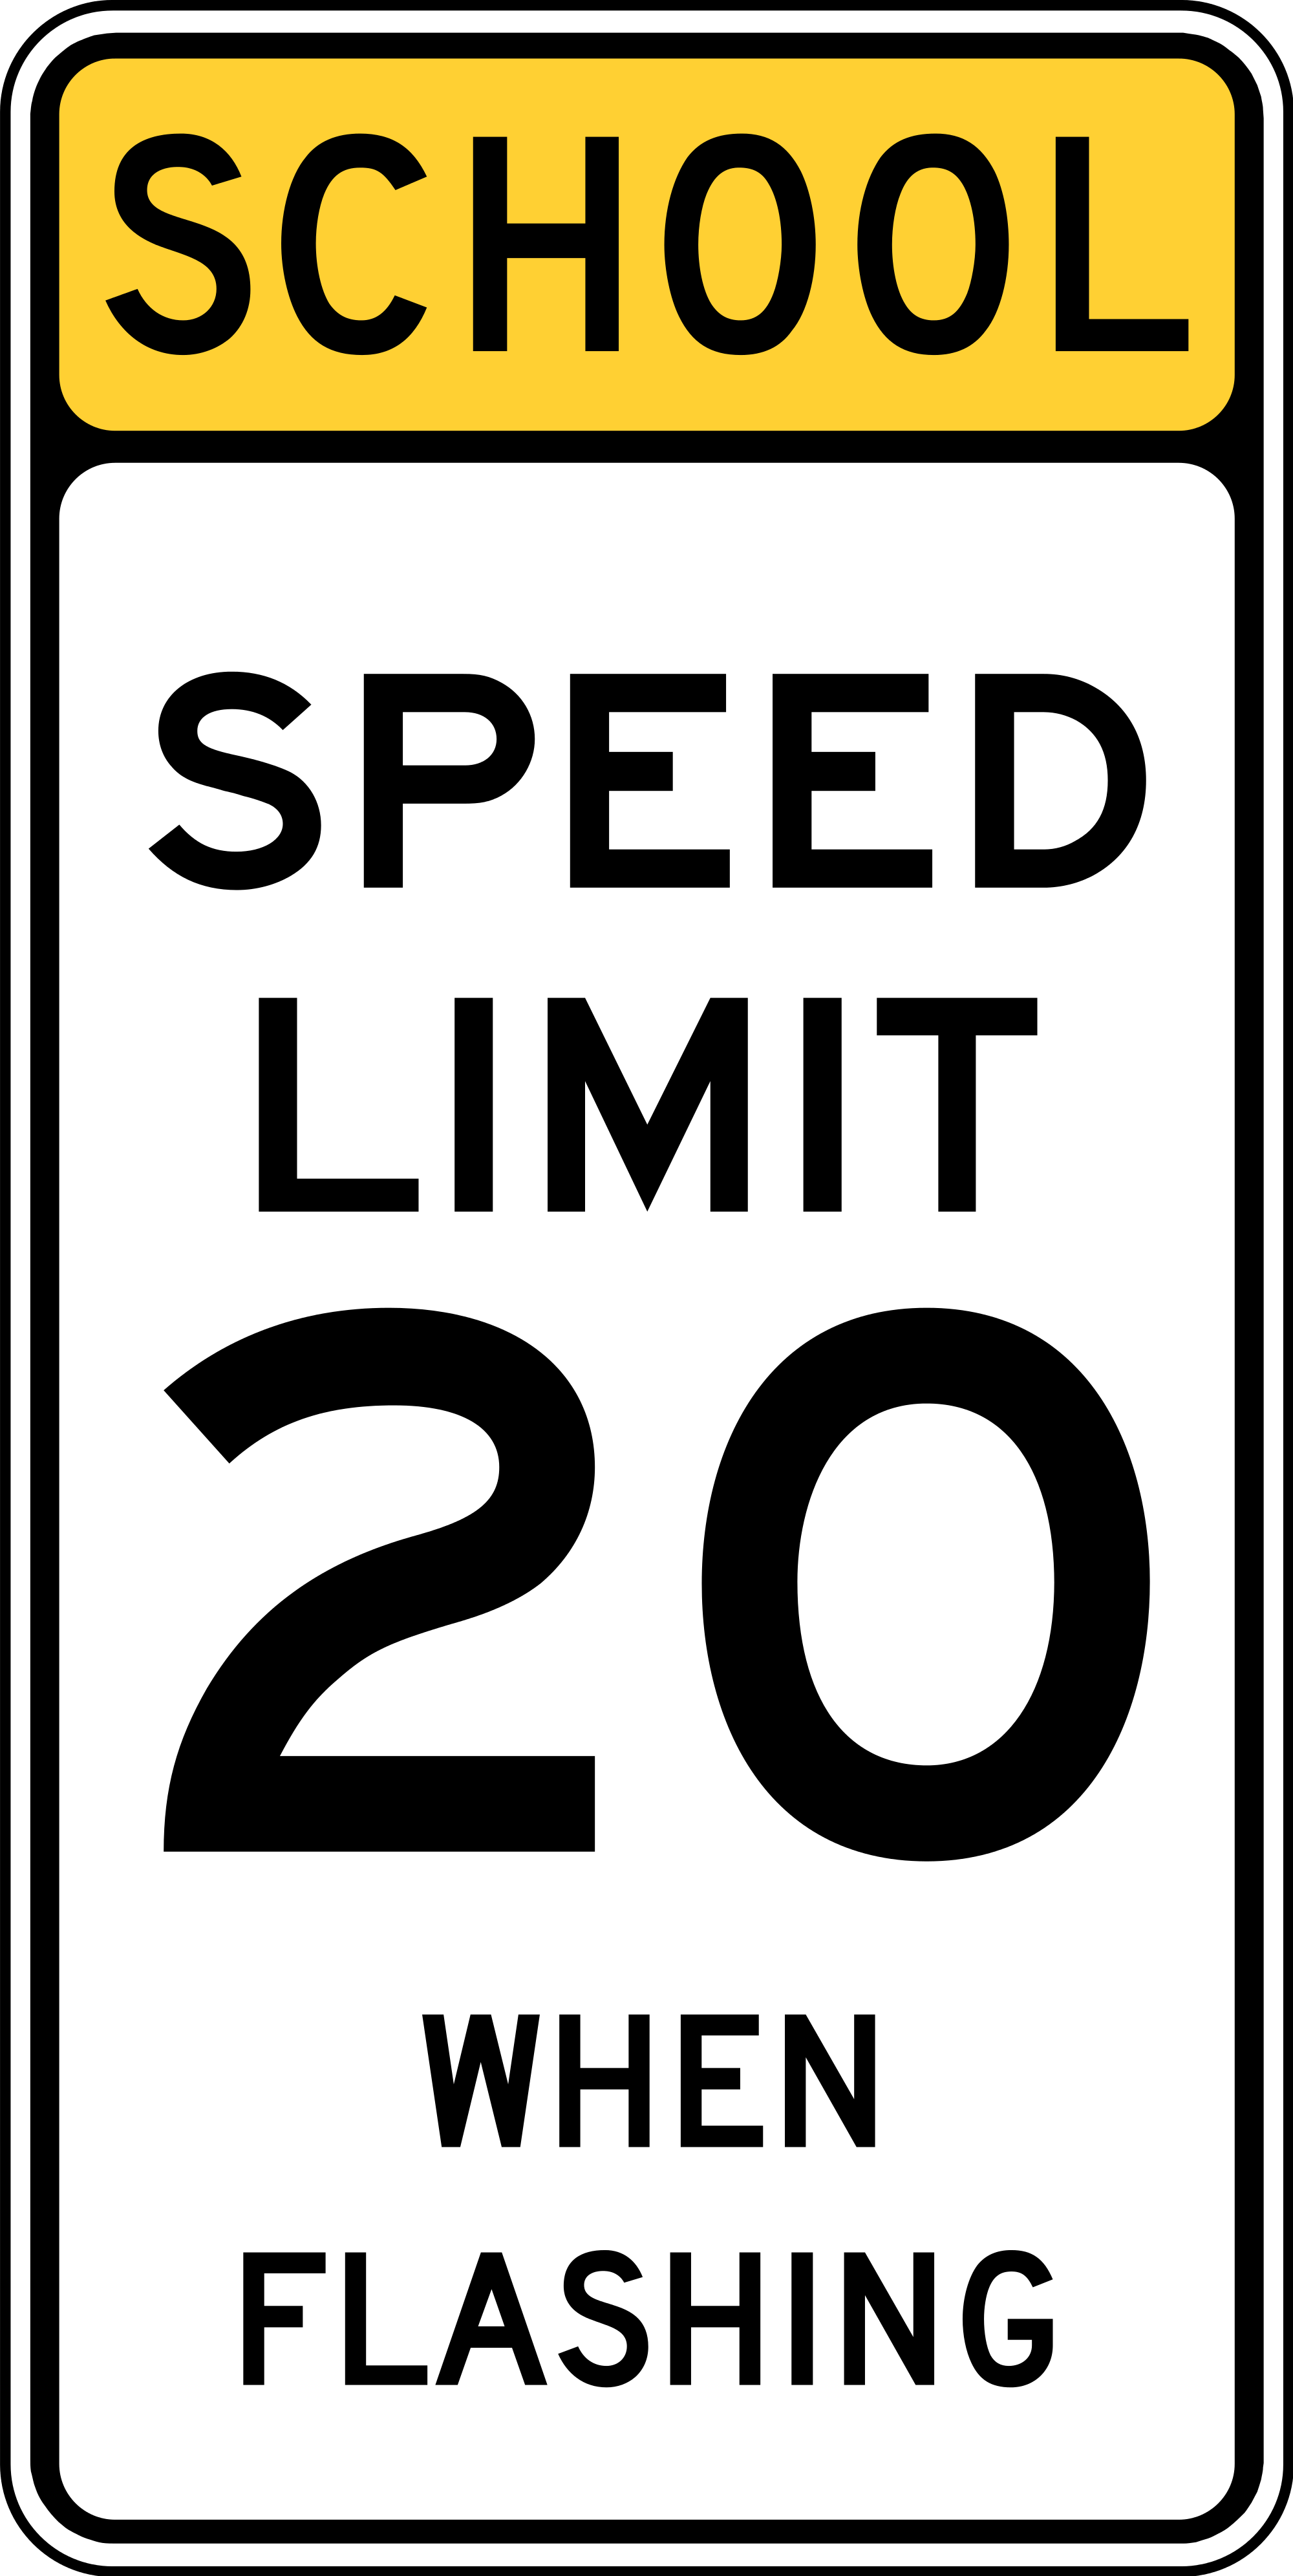 S4-5a Reduced Speed 20 MPH School Zone Ahead Sign